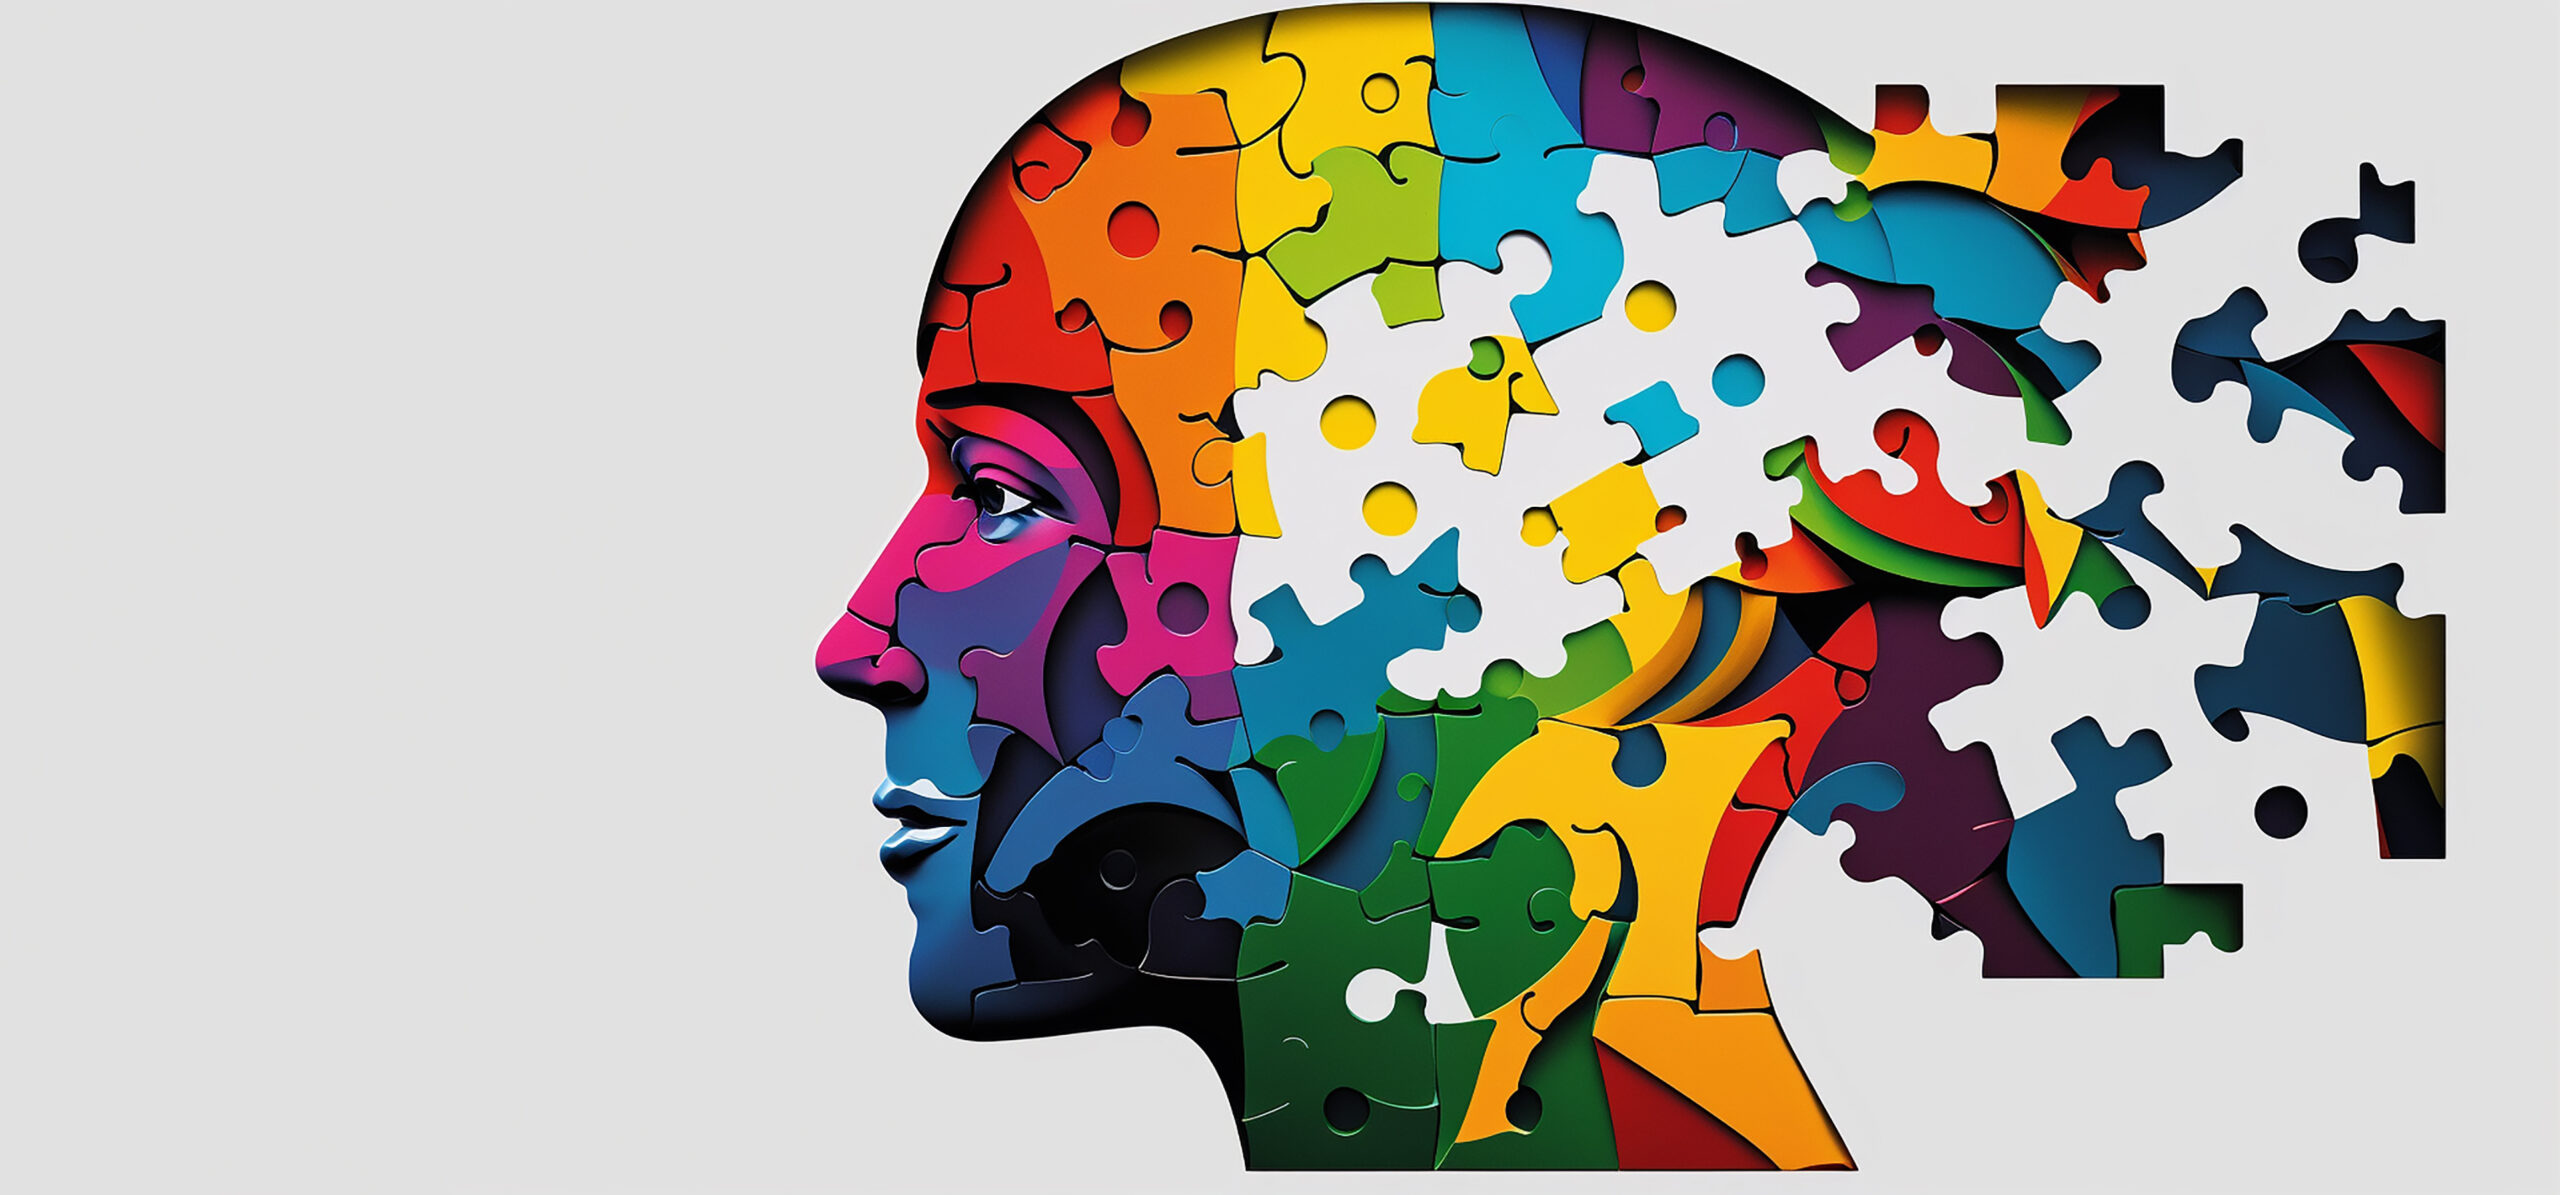 Human head profile and jigsaw puzzle, cognitive psychology or ps